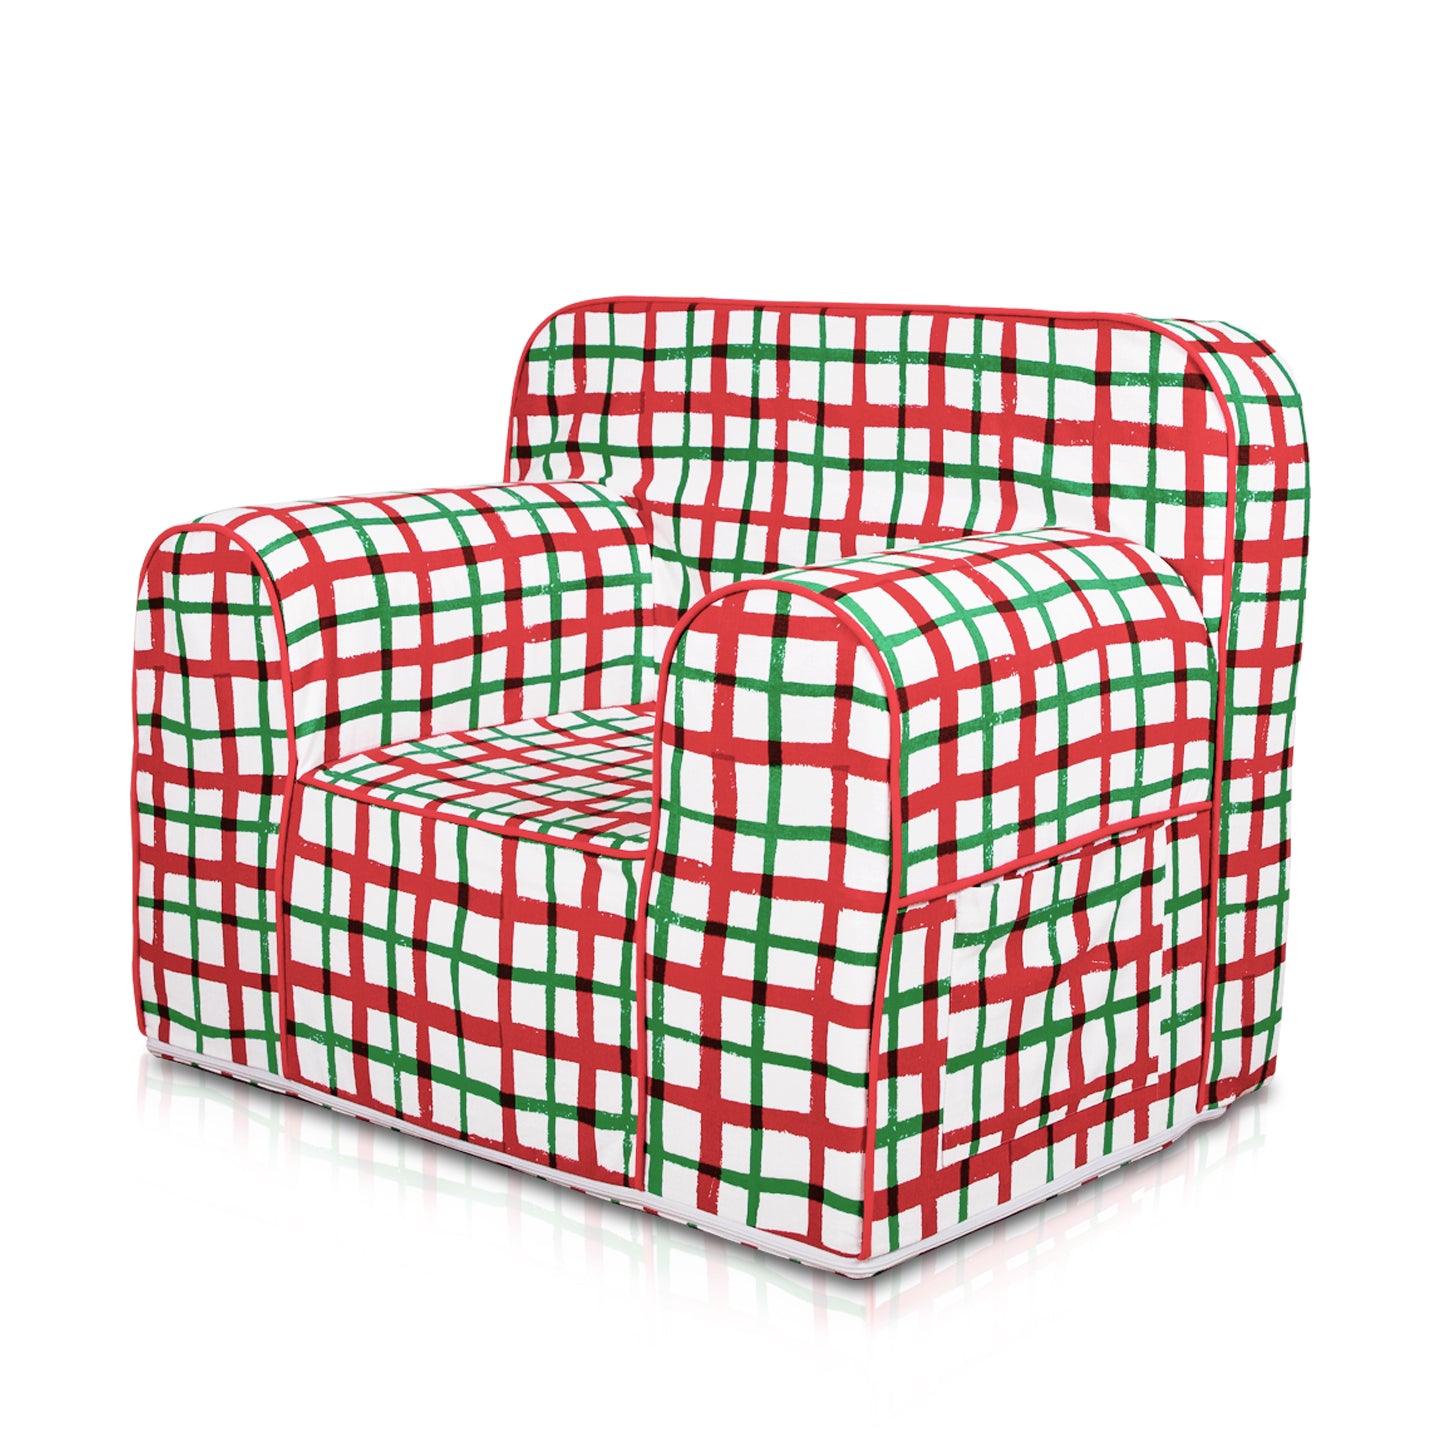 Role Play Comfy Sofa- Hand Drawn Check Red And Green